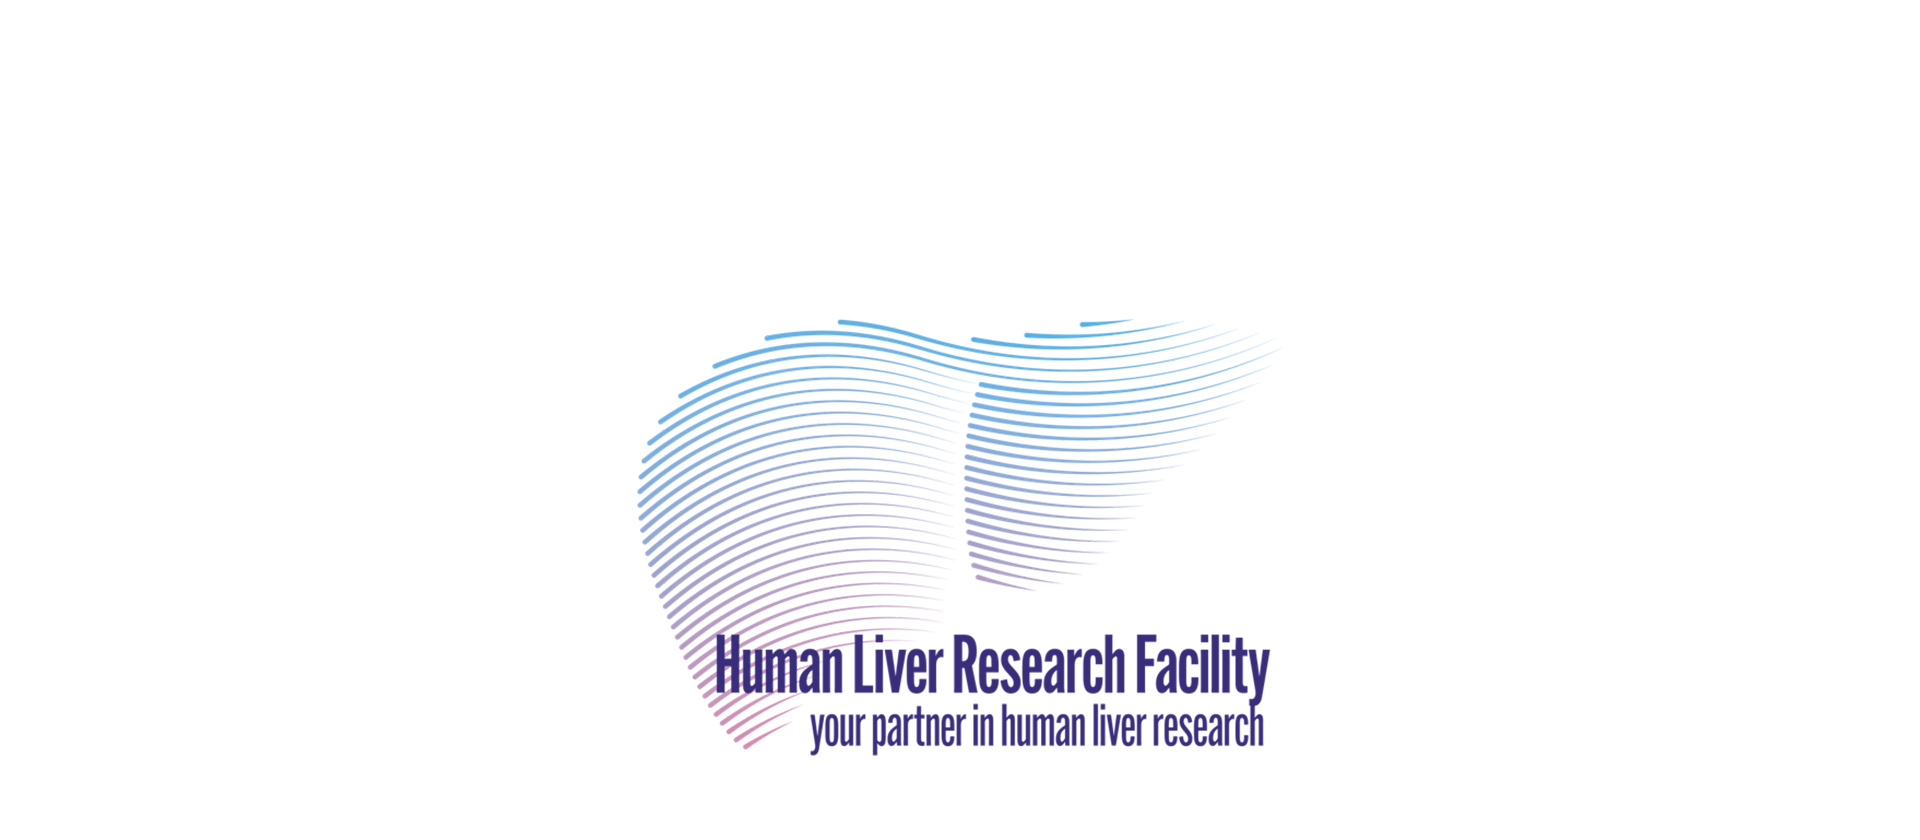 Human Liver Research Facility Banner